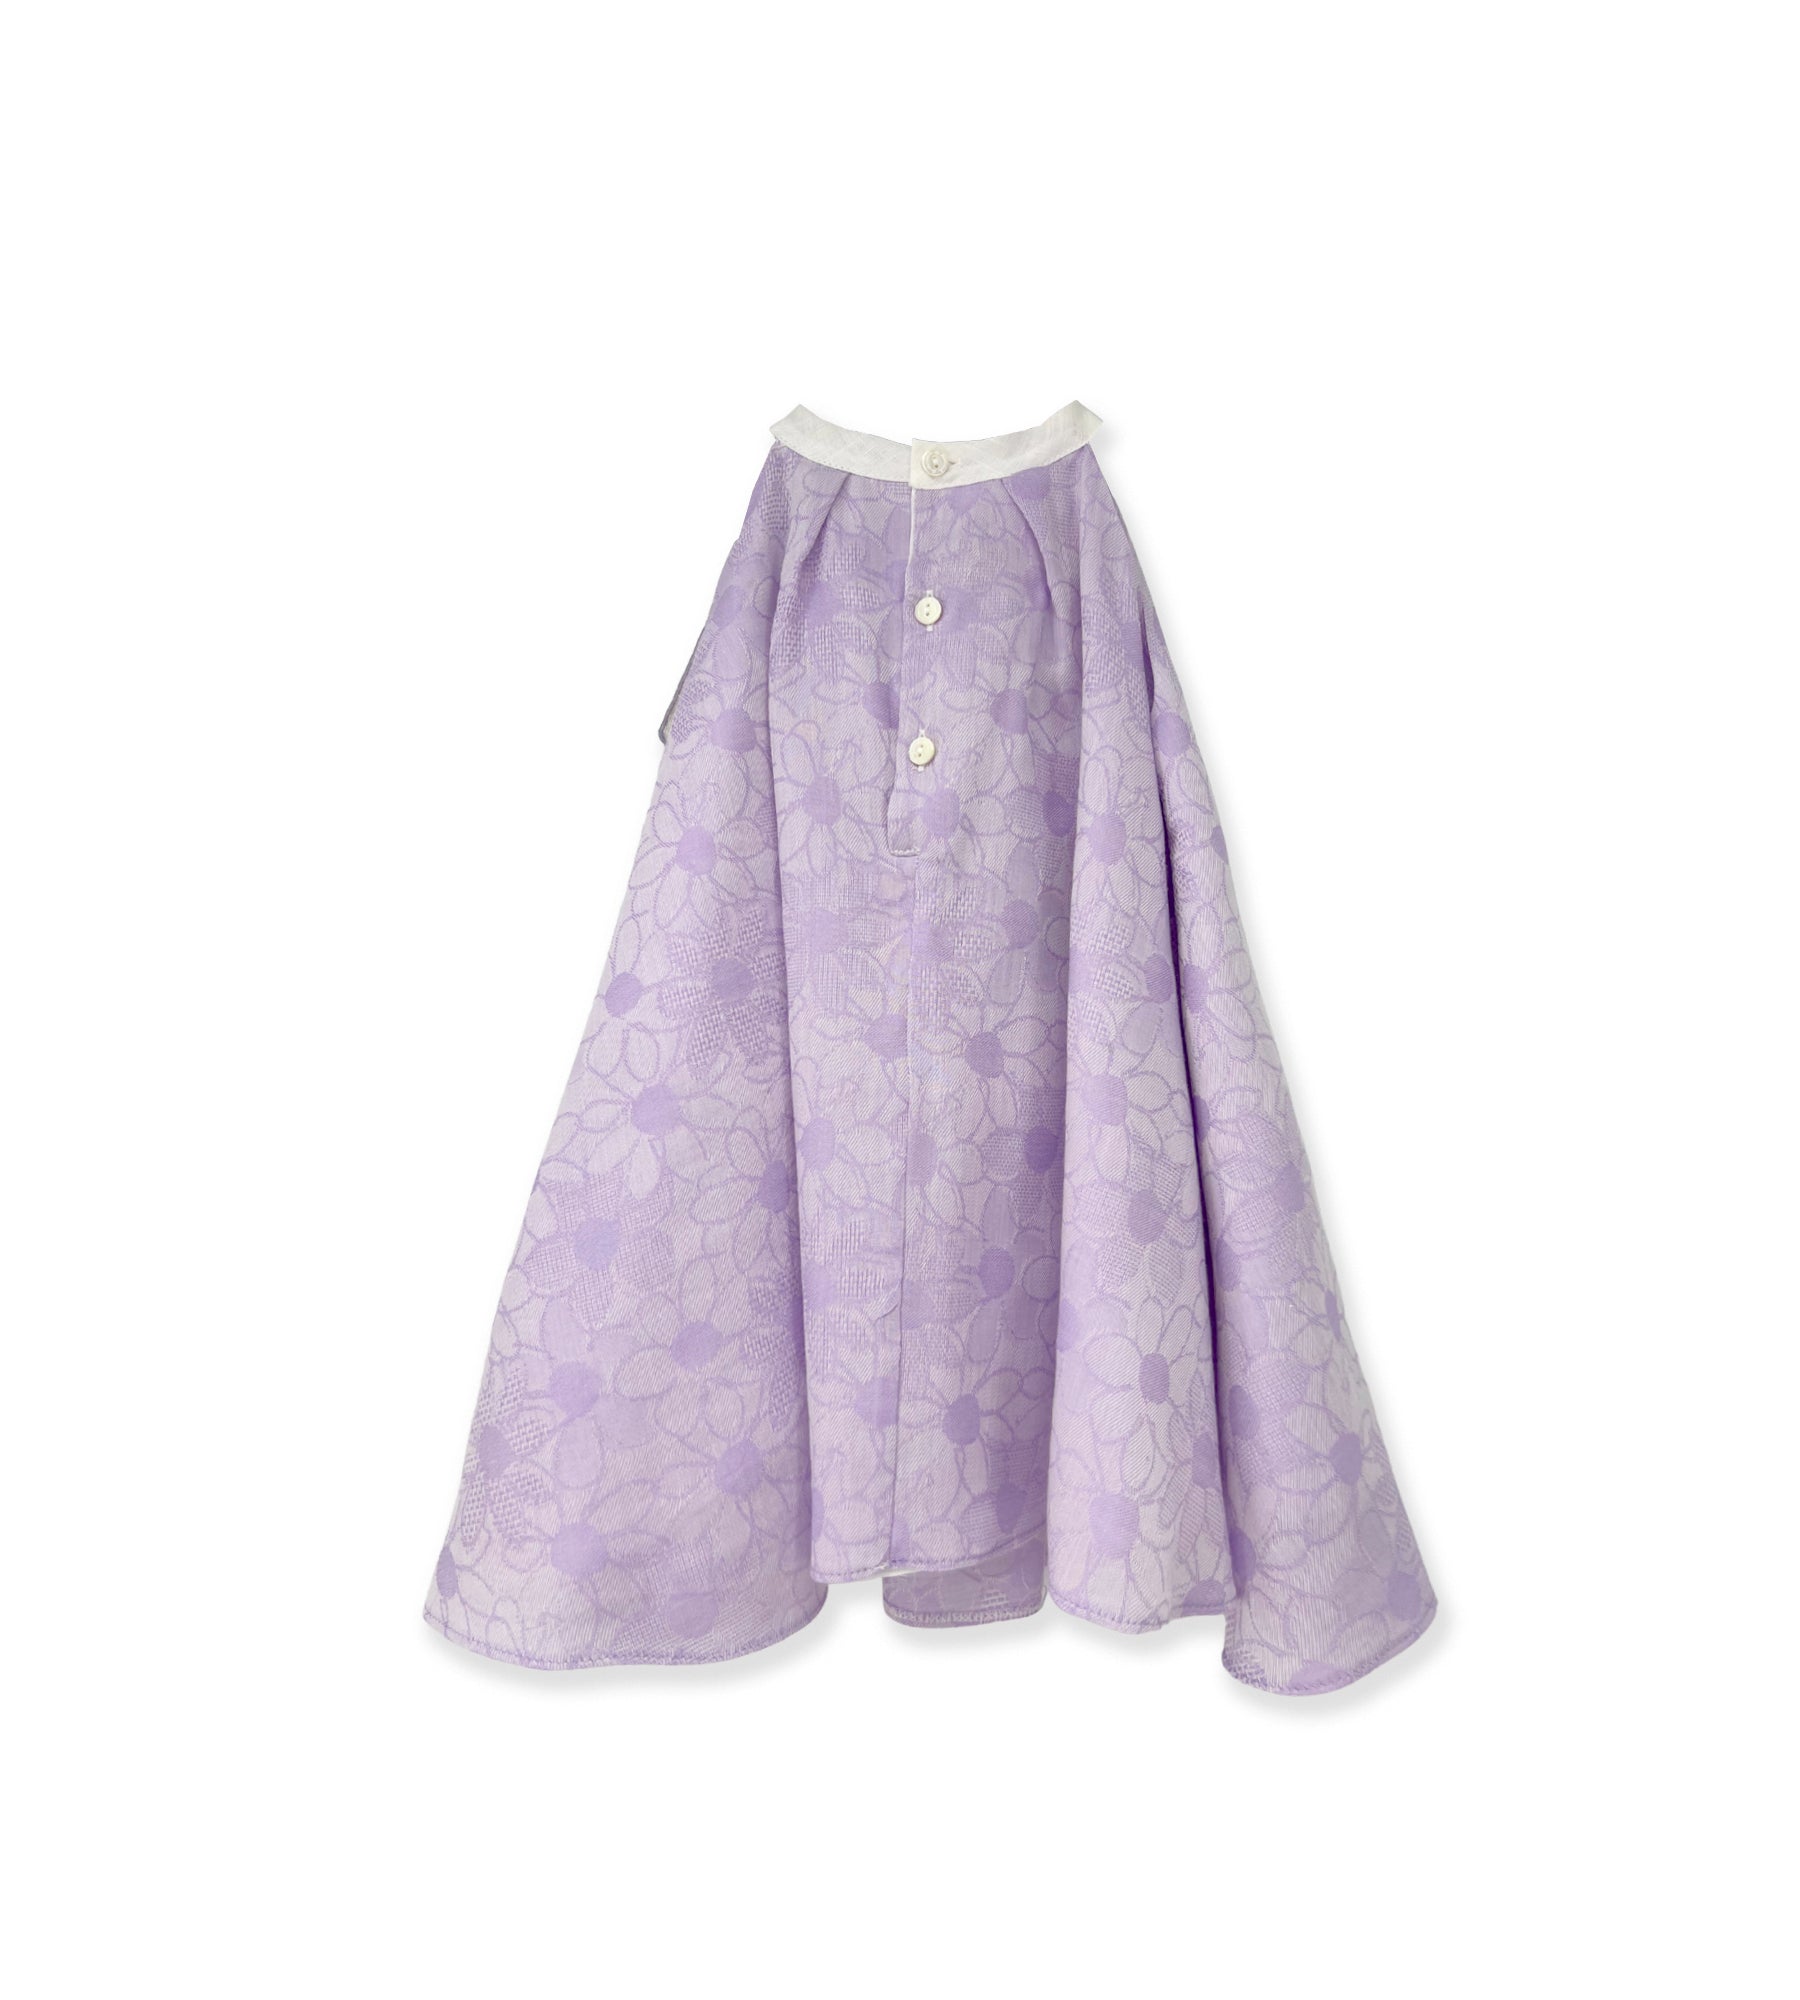 LILAC DRESS WITH FLOWERS